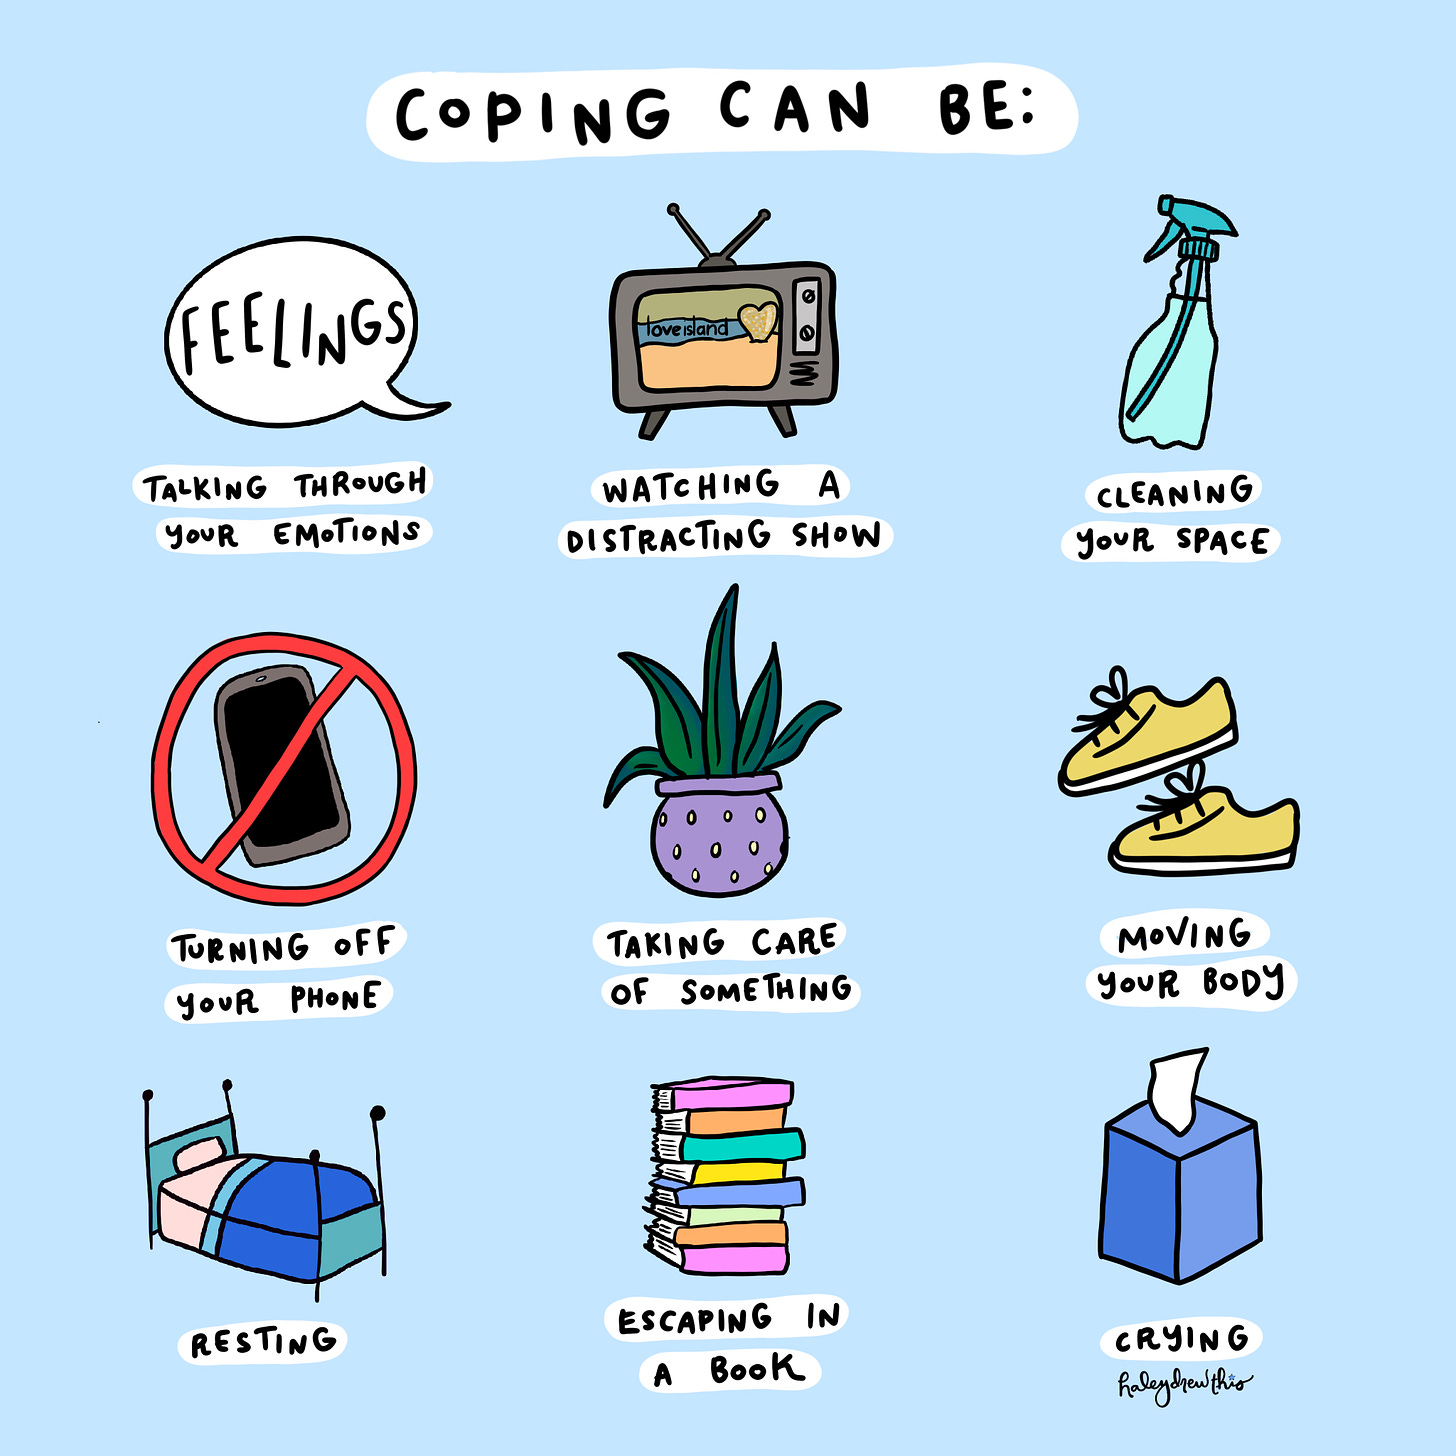 Blue background with title "Coping Can Be," followed by "talking through your emotions, "watching a distracting show," "cleaning your space," "turning off your phone," "taking care of something," "moving your body."